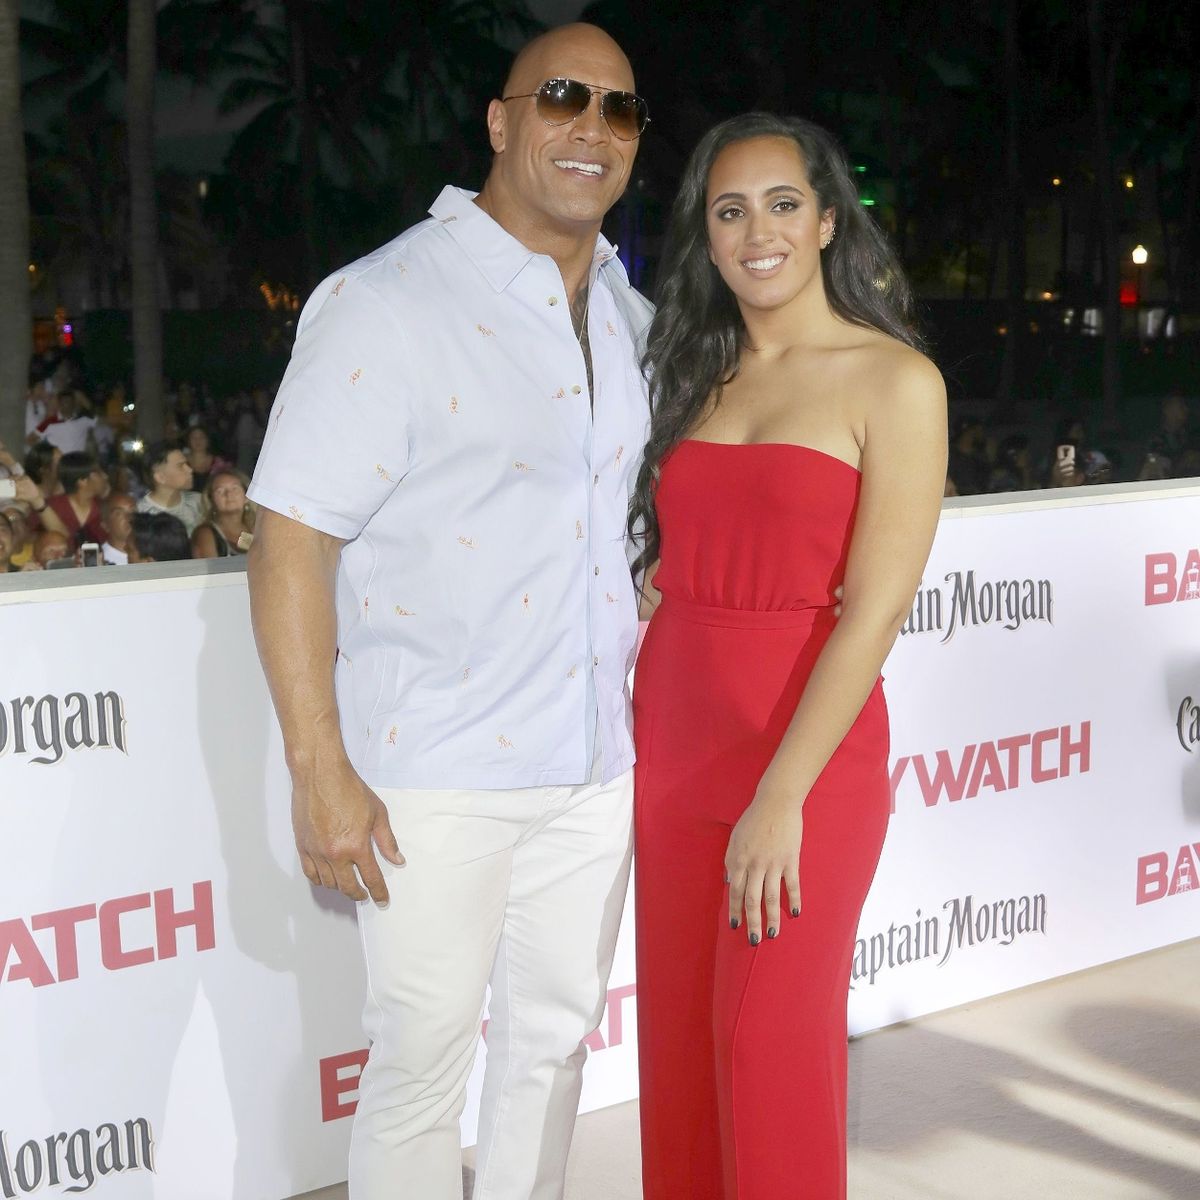 Dwayne 'The Rock' Johnson's daughter reveals she wants to follow in dad's giants footsteps and become WWE star - Mirror Online